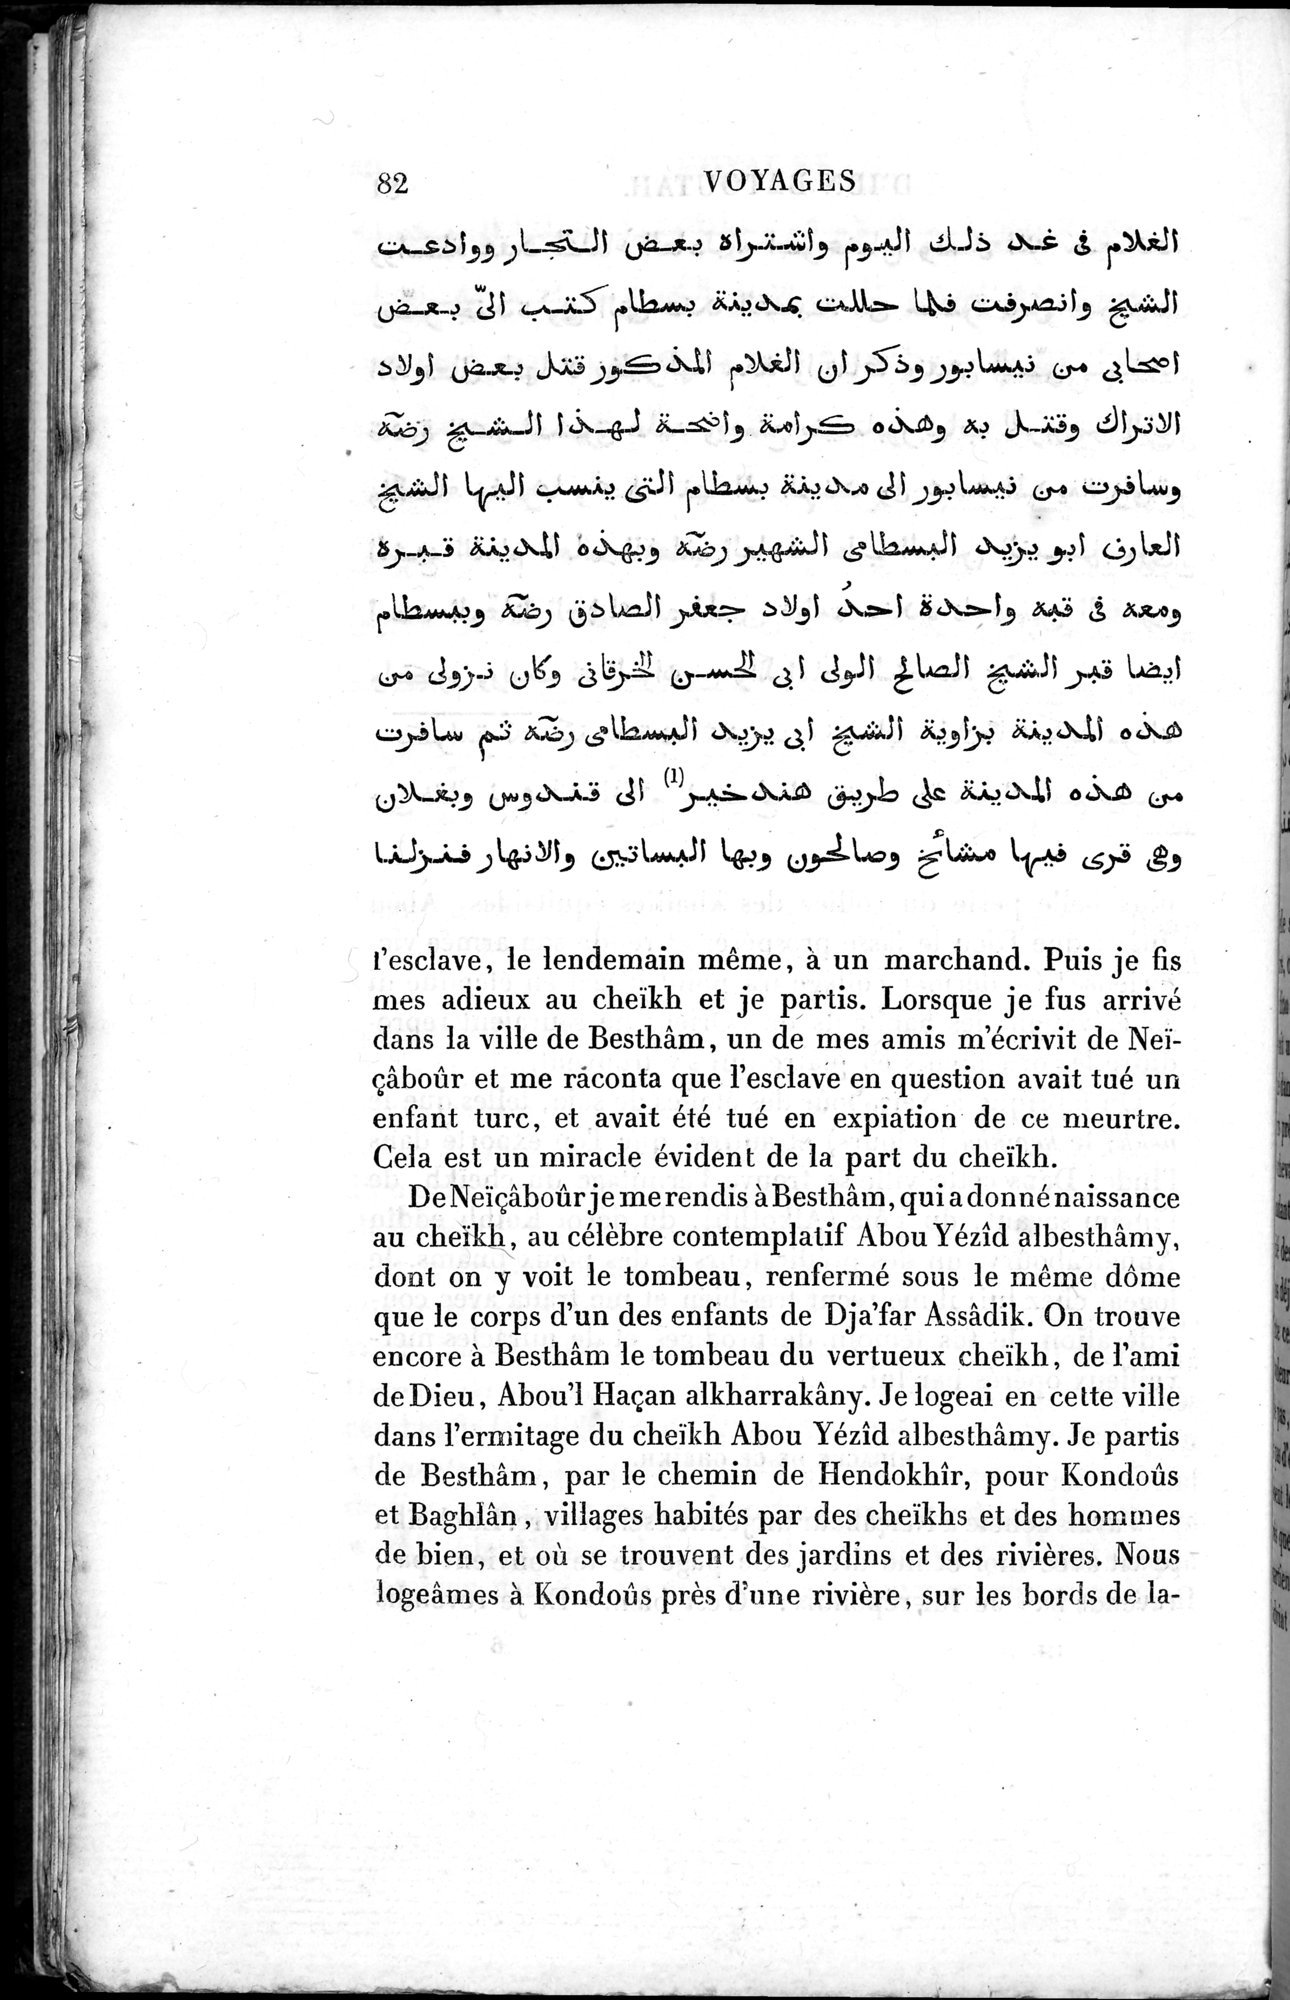 Voyages d'Ibn Batoutah : vol.3 / Page 122 (Grayscale High Resolution Image)